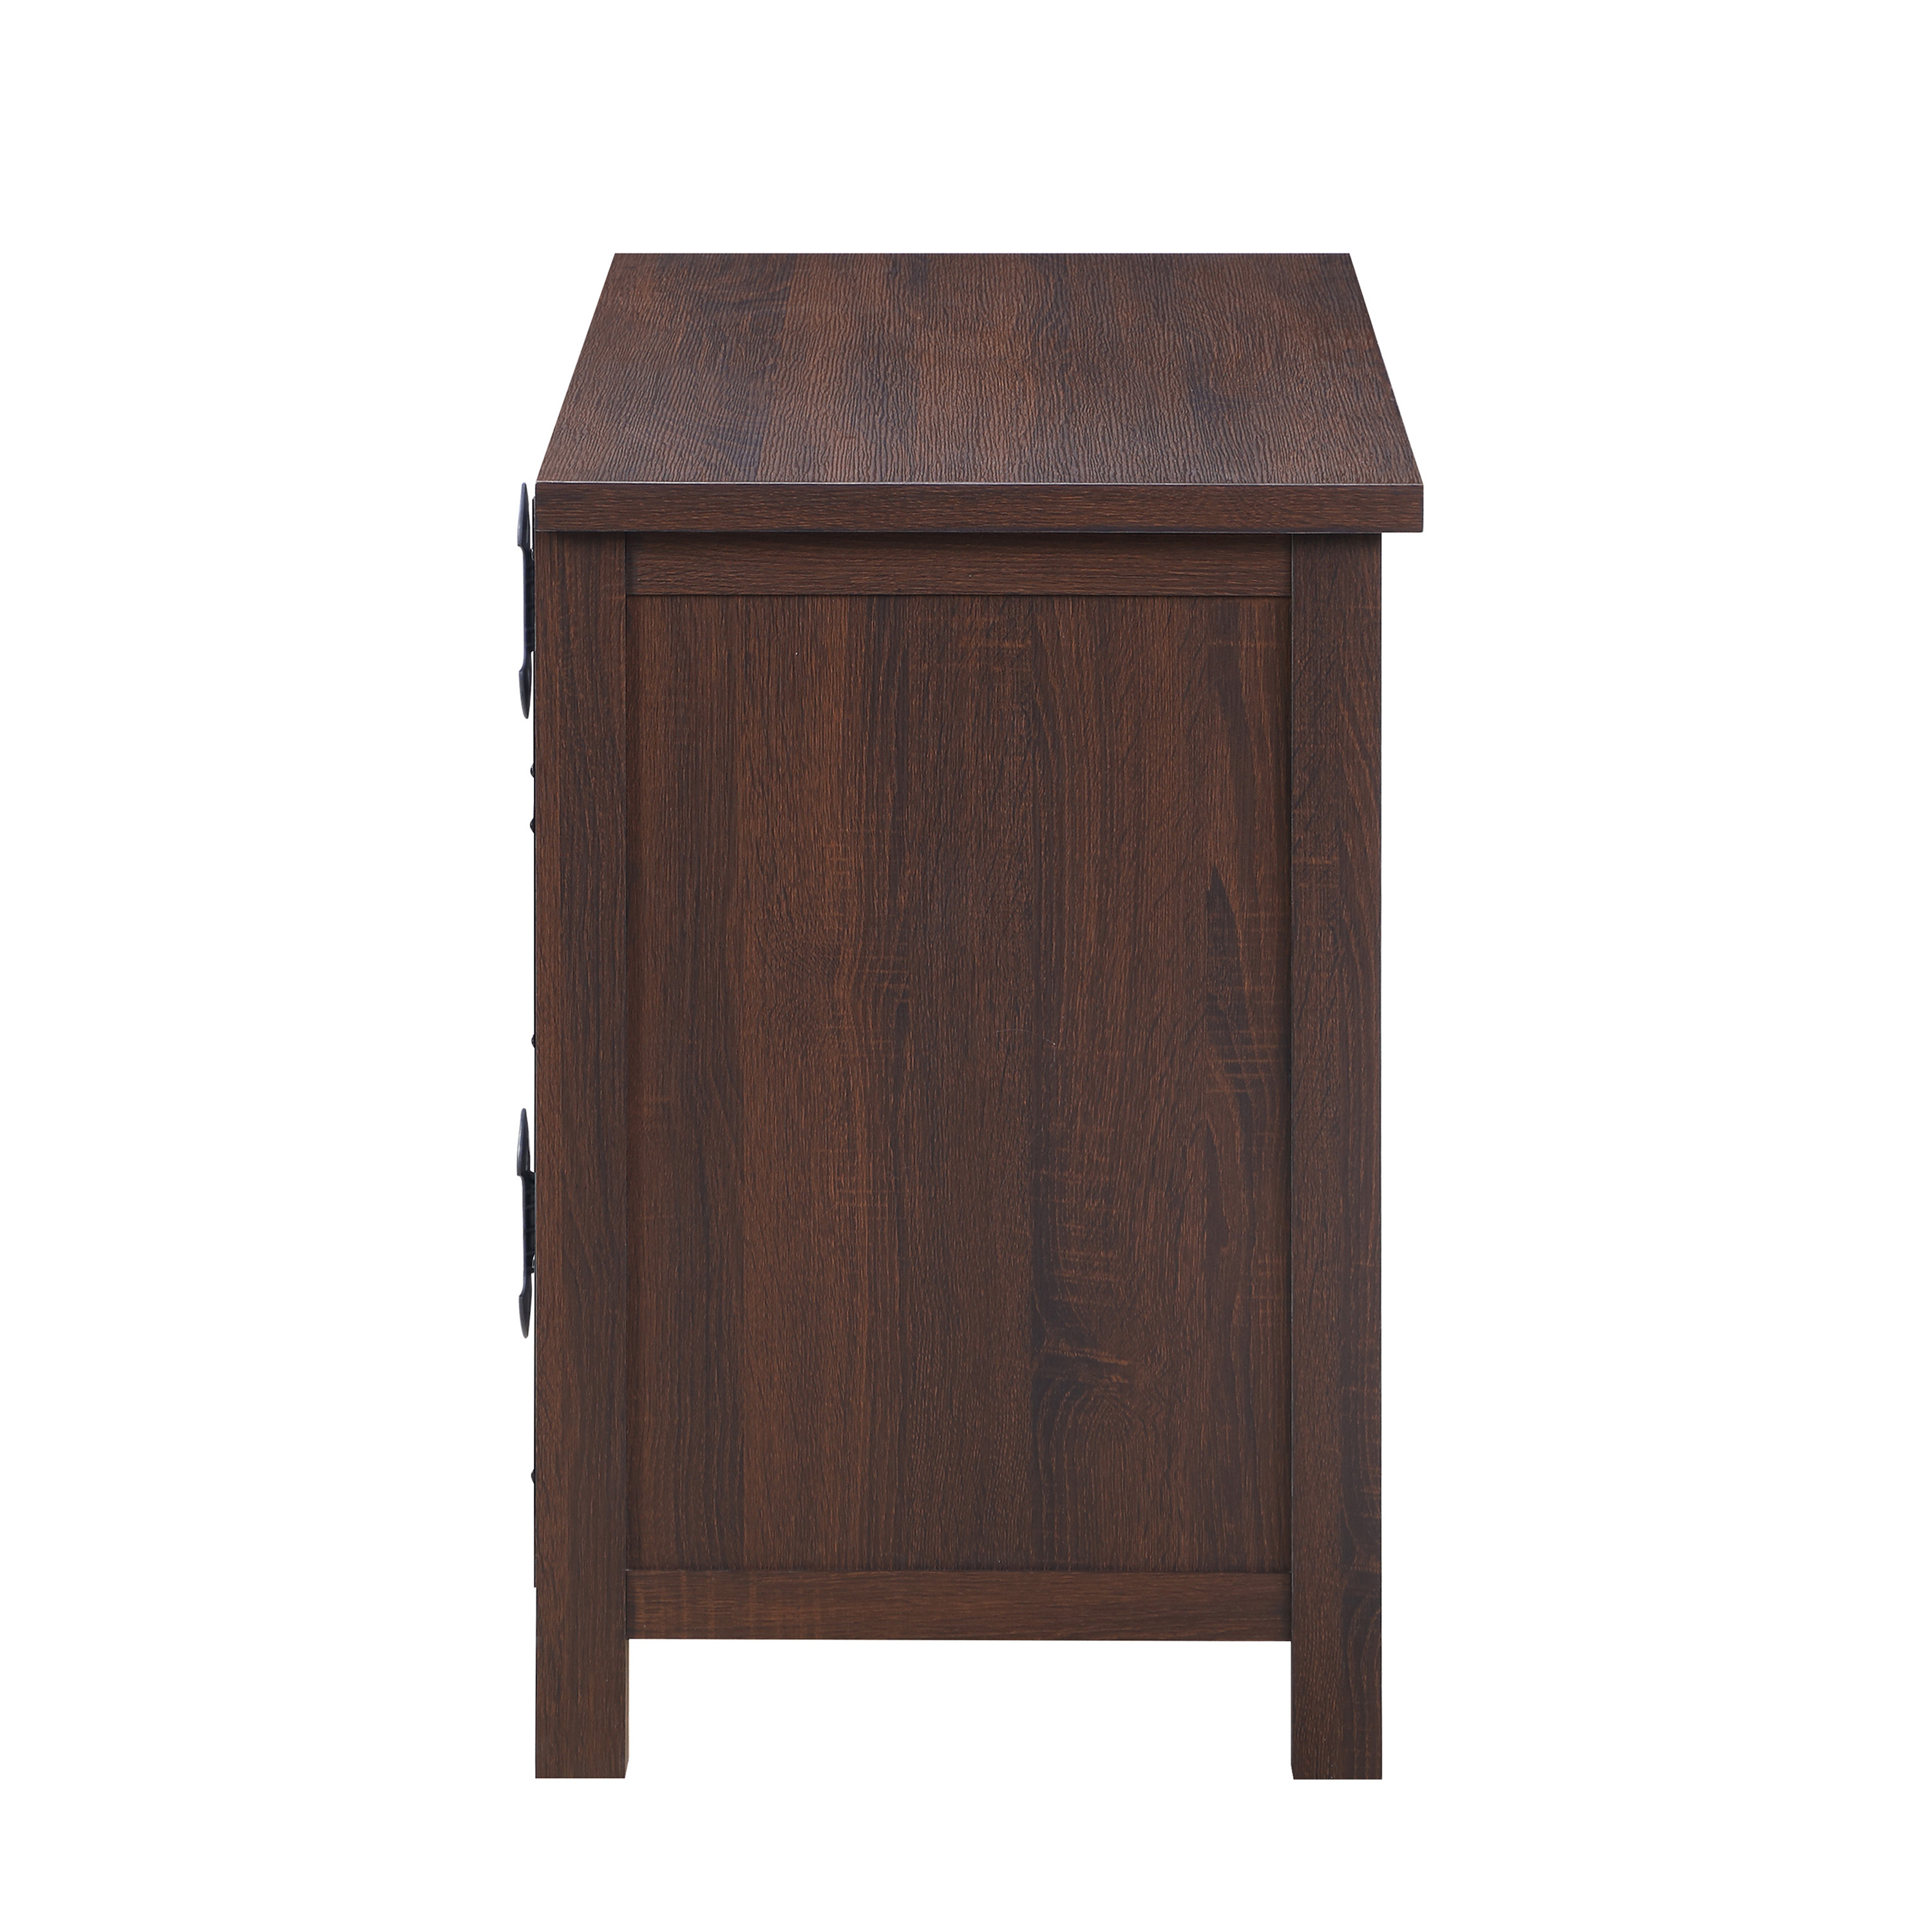 Better Homes & Gardens Oxford Square TV Stand for TVs up to 55", Dark Brown - image 3 of 12